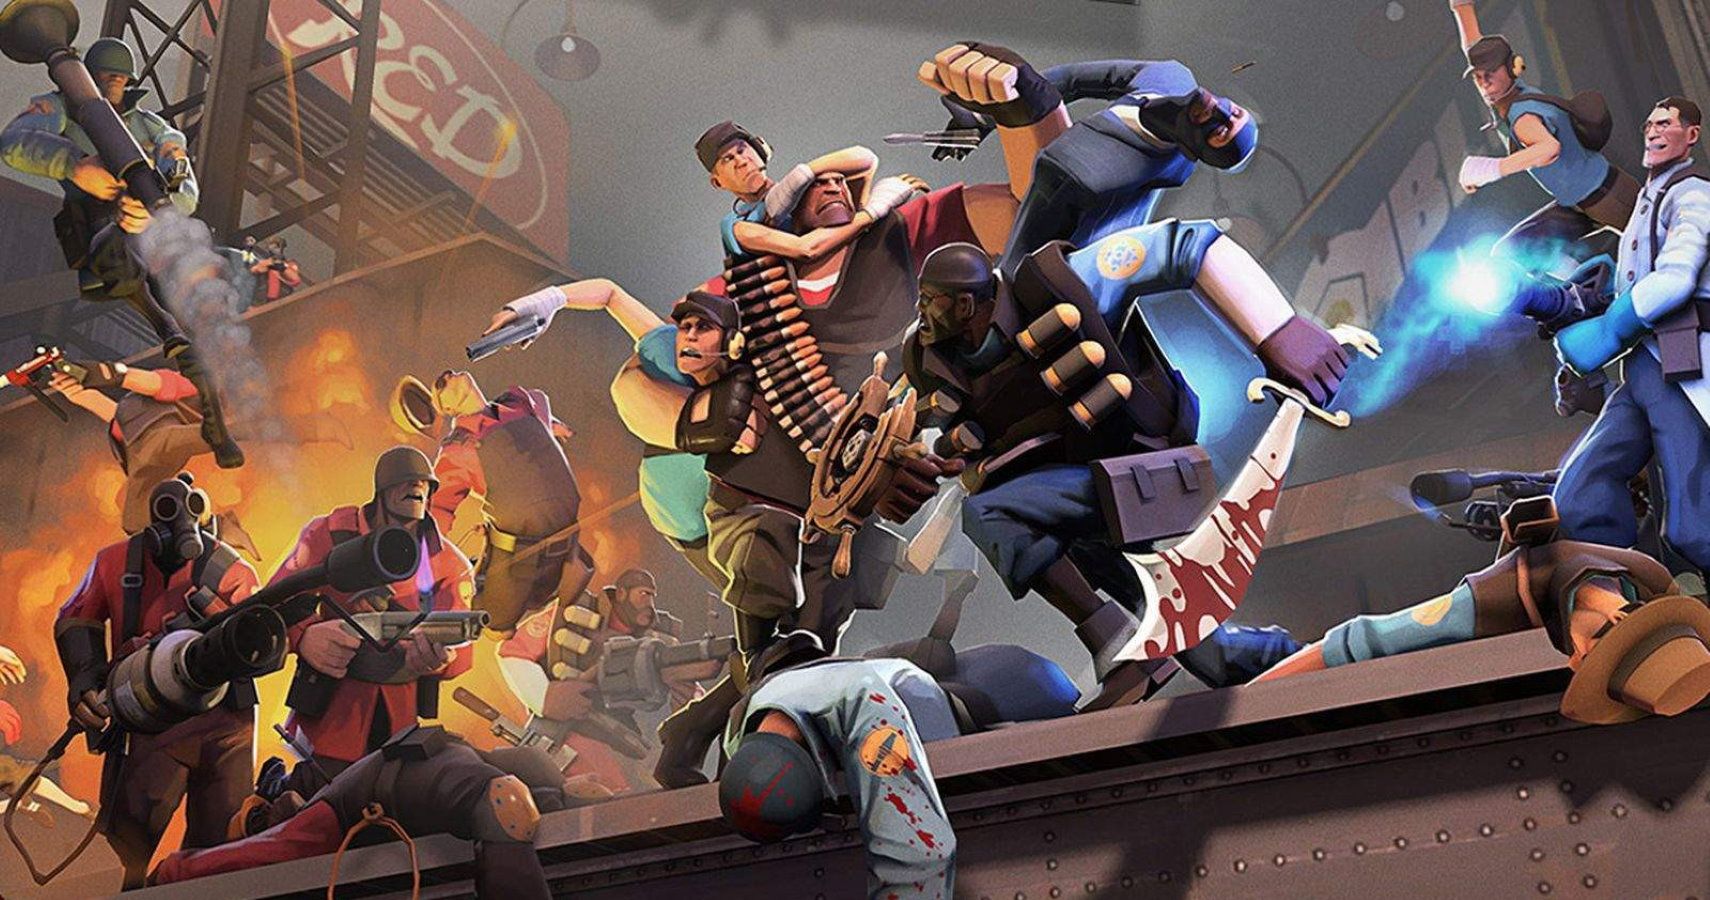 Rumor: Team Fortress 3 In Active Development, Will Be Free-To-Play